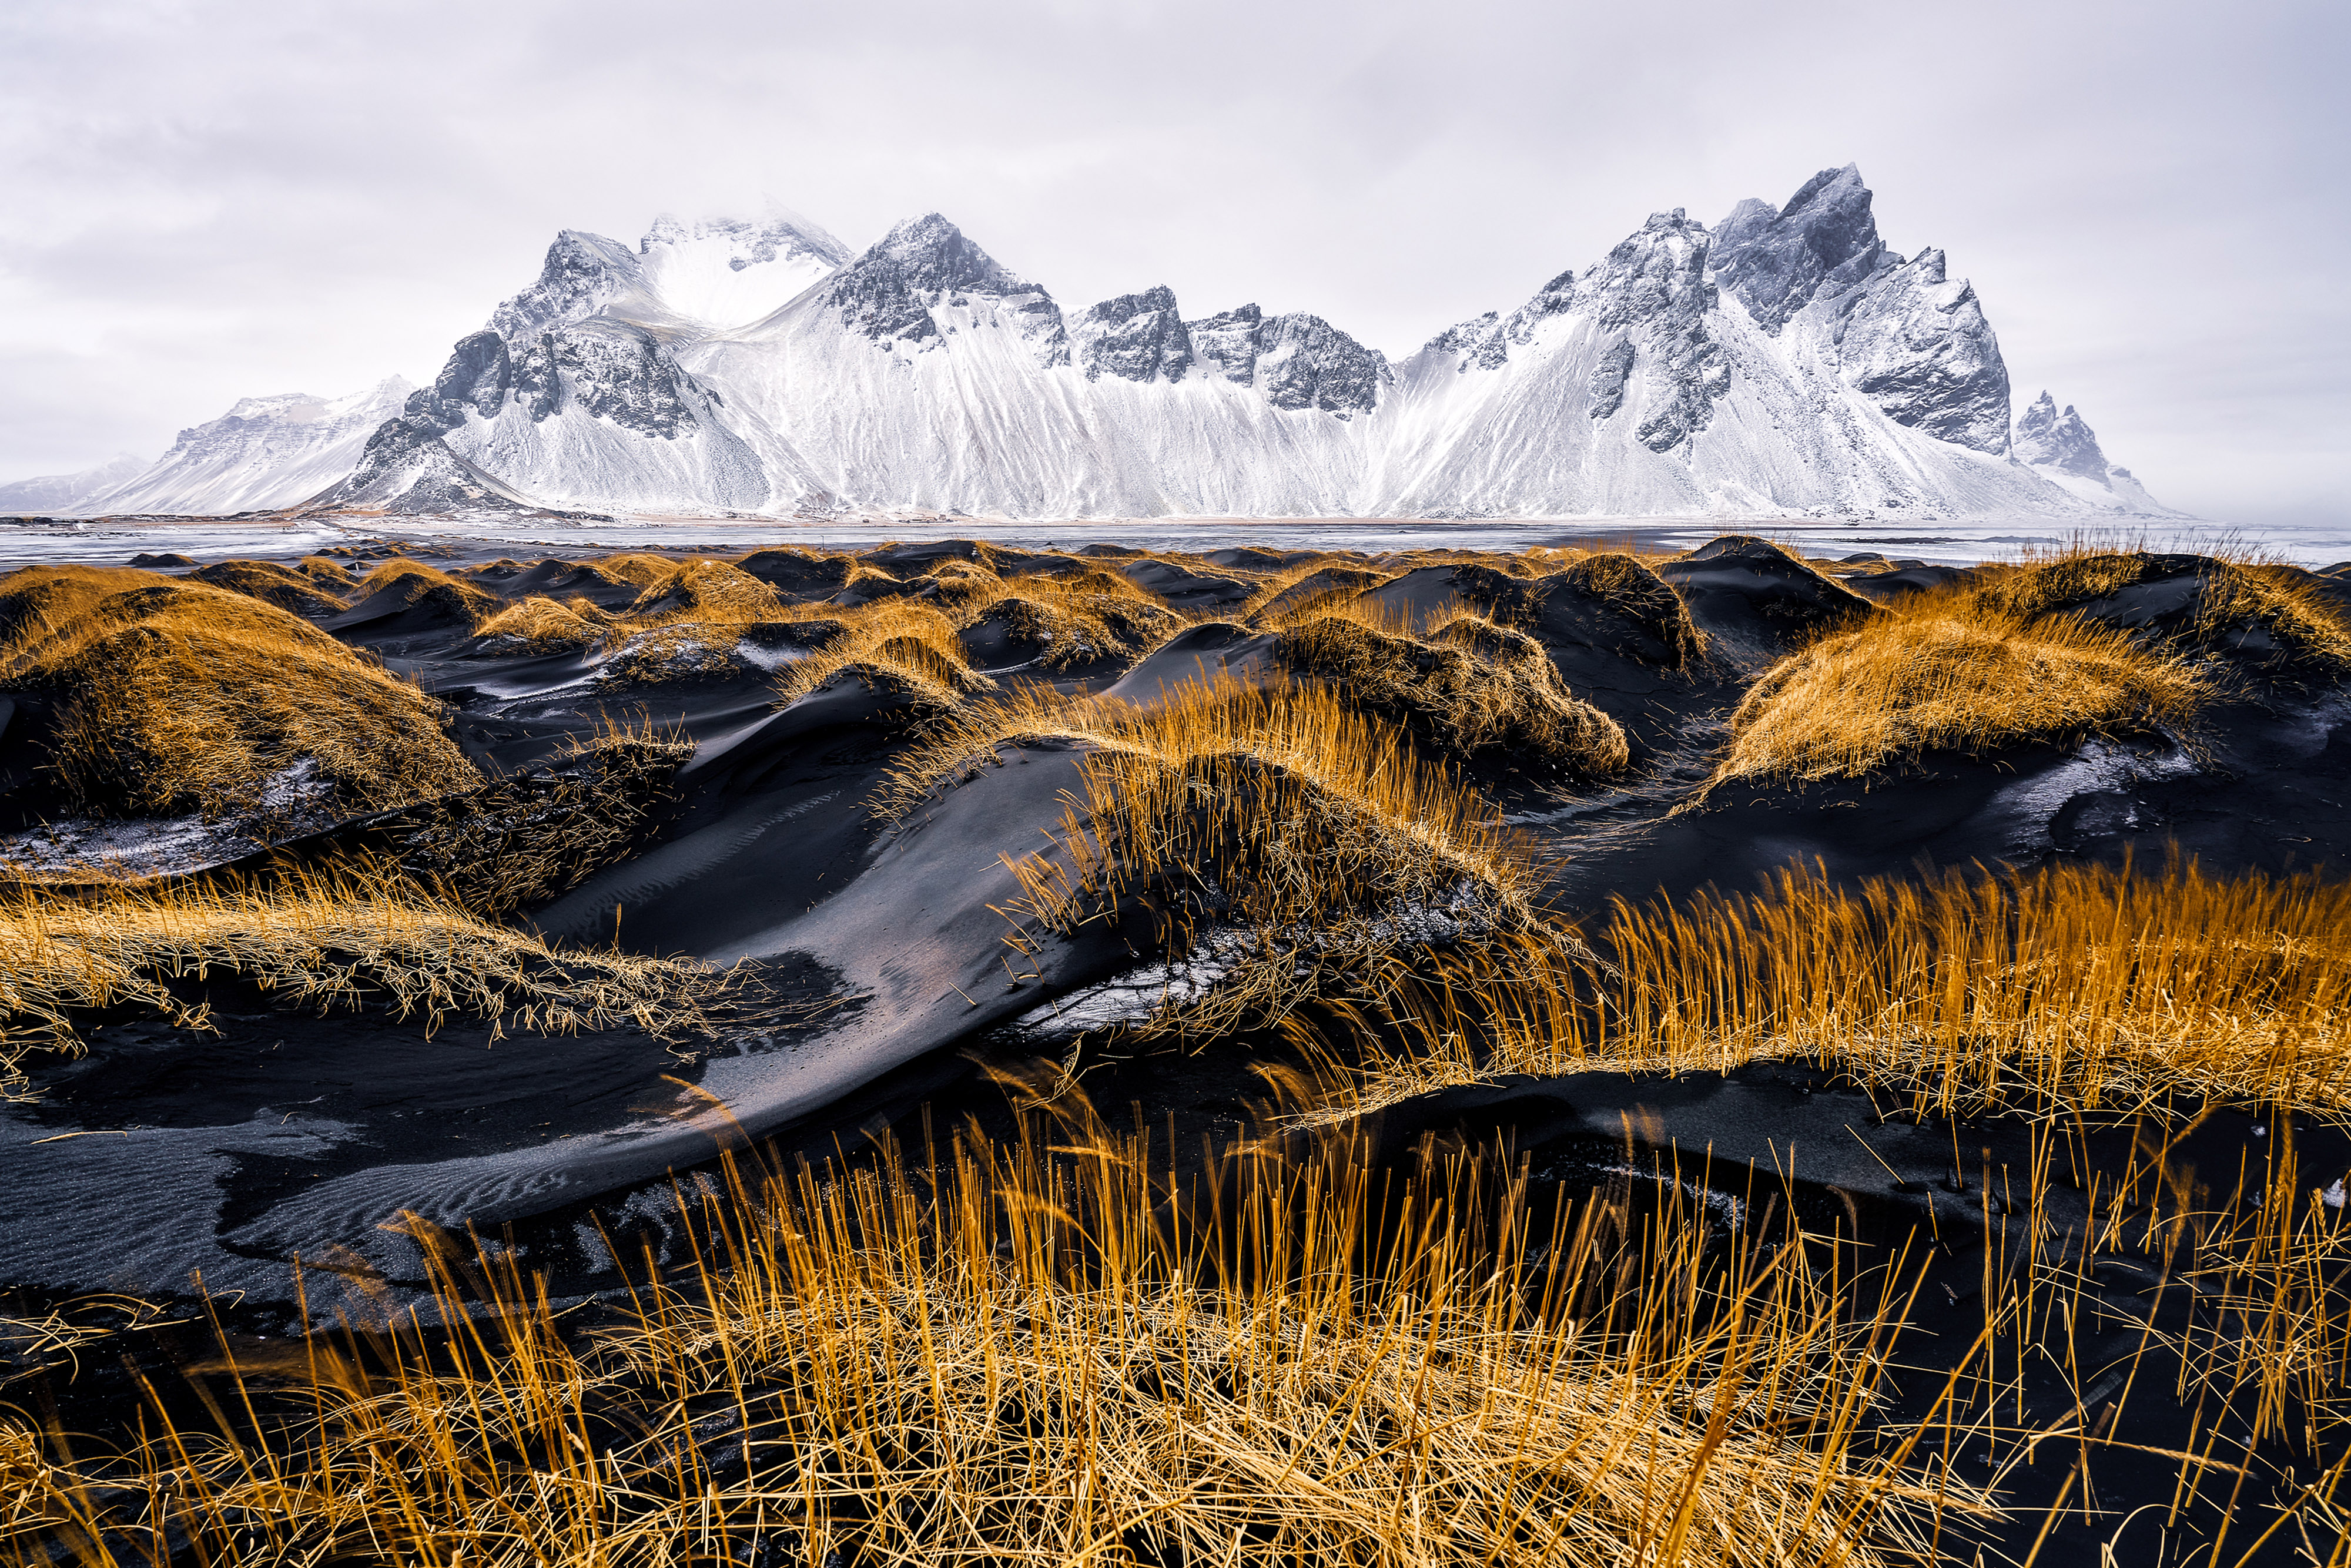 'Difference'. Winter in Stokksnes on the beach with black sand and the majestic mountain, Vestrahorn. © Ivan Pedretti/TNC Photo Contest